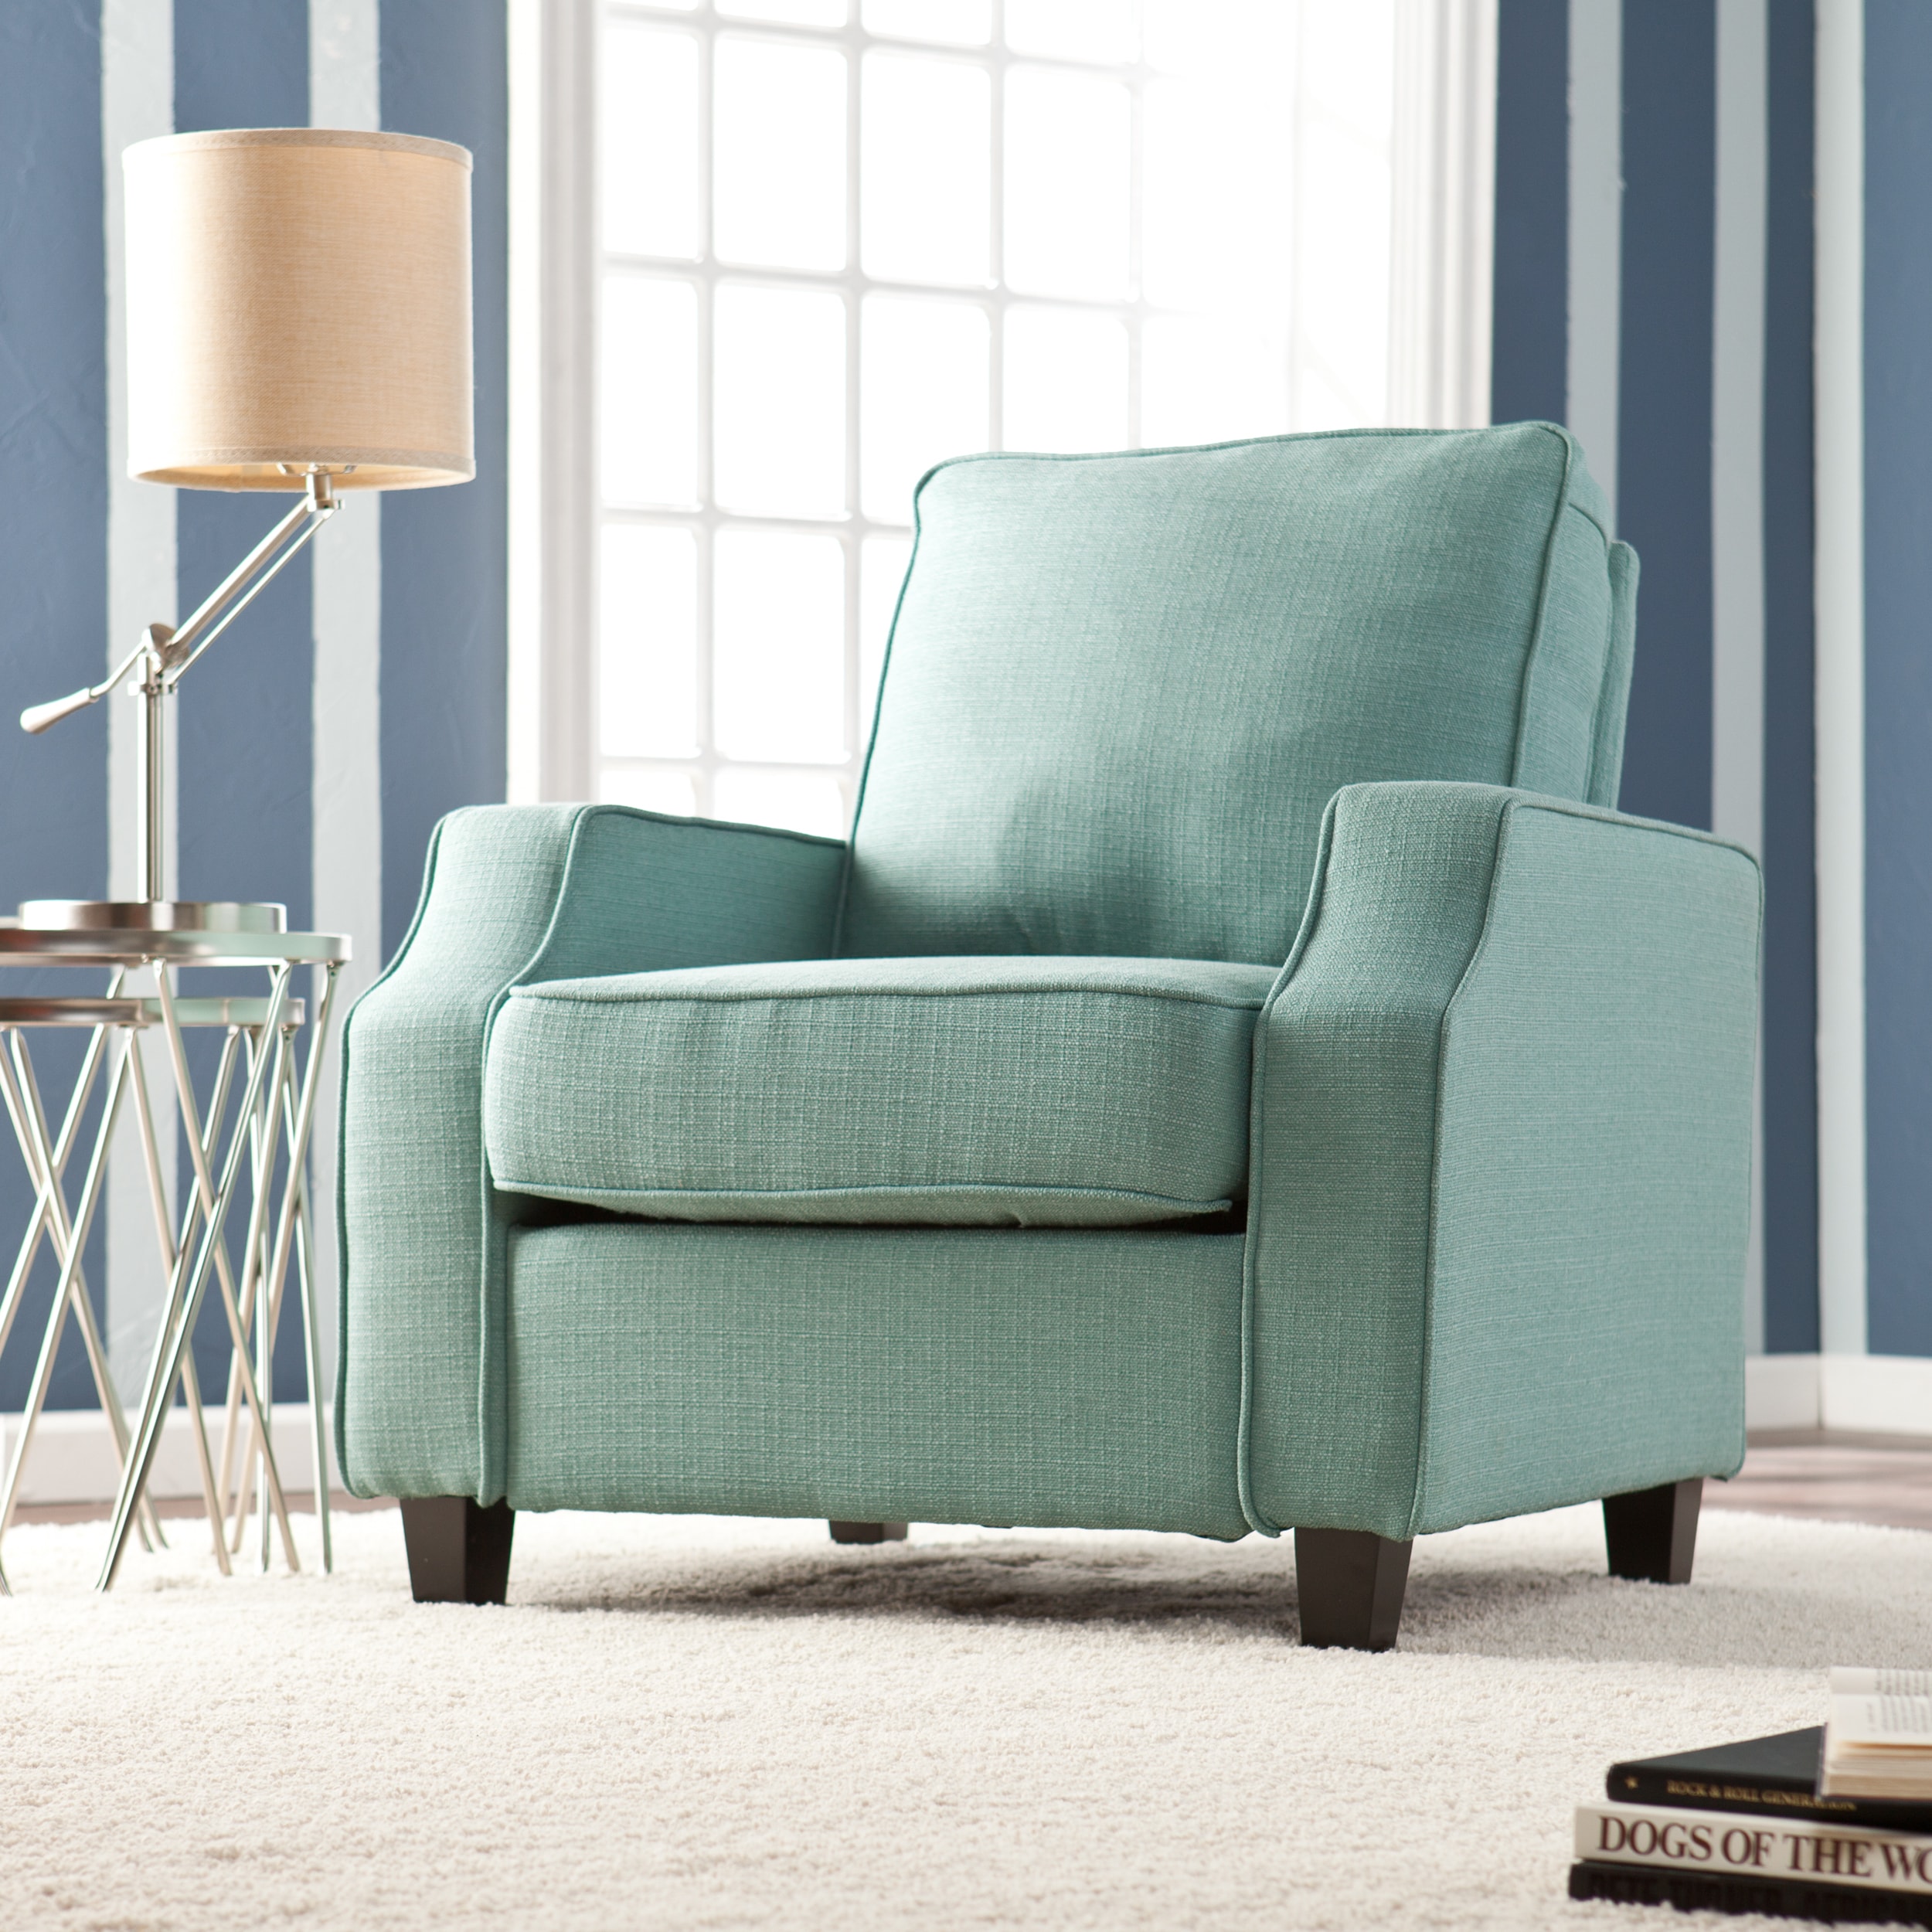 Upton Home Corey Turquoise Upholstered Arm Chair